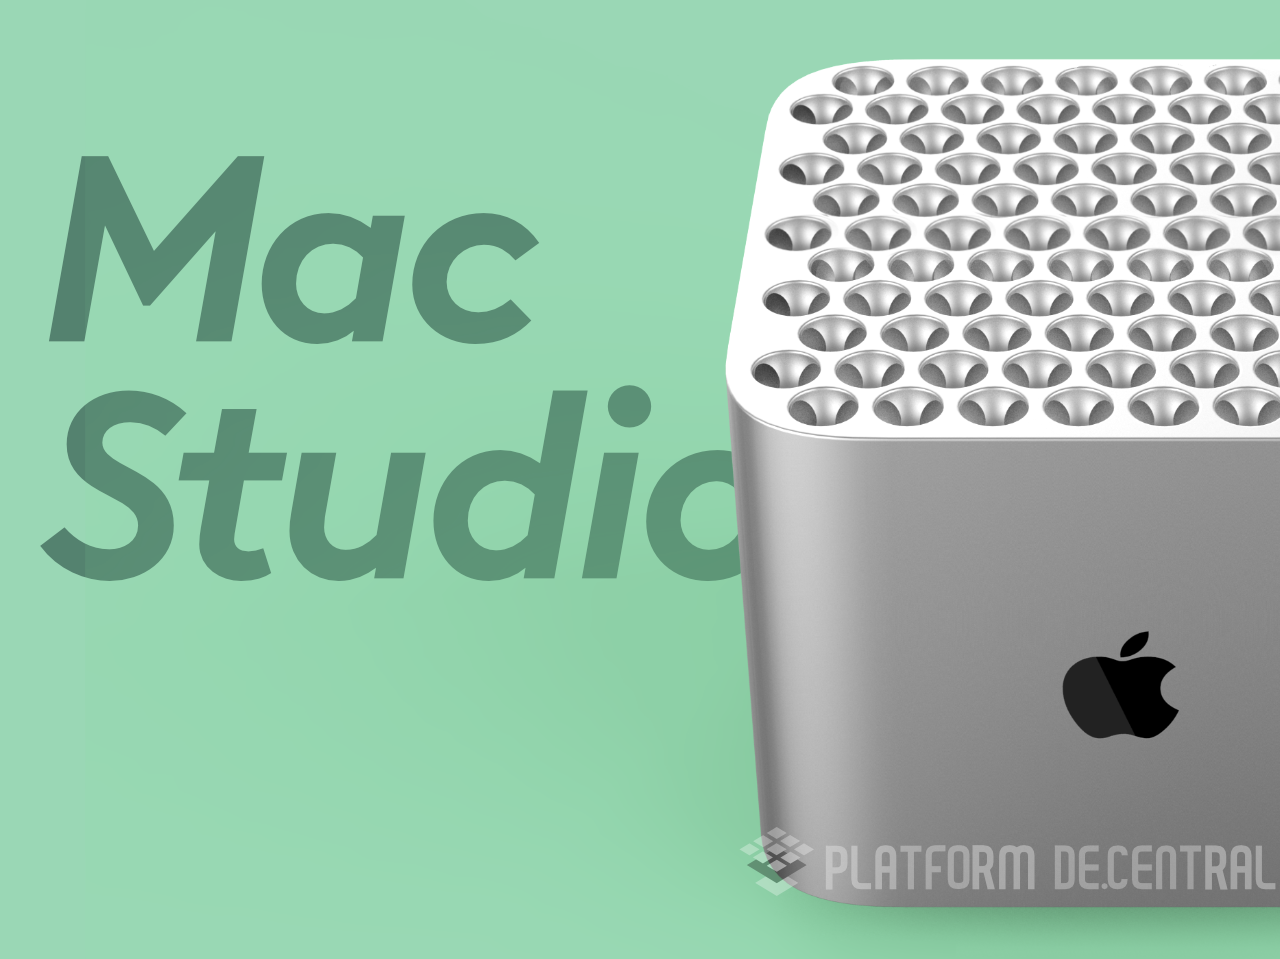 Apple’s rumored high-end Mac mini may actually be the all-new Mac Studio